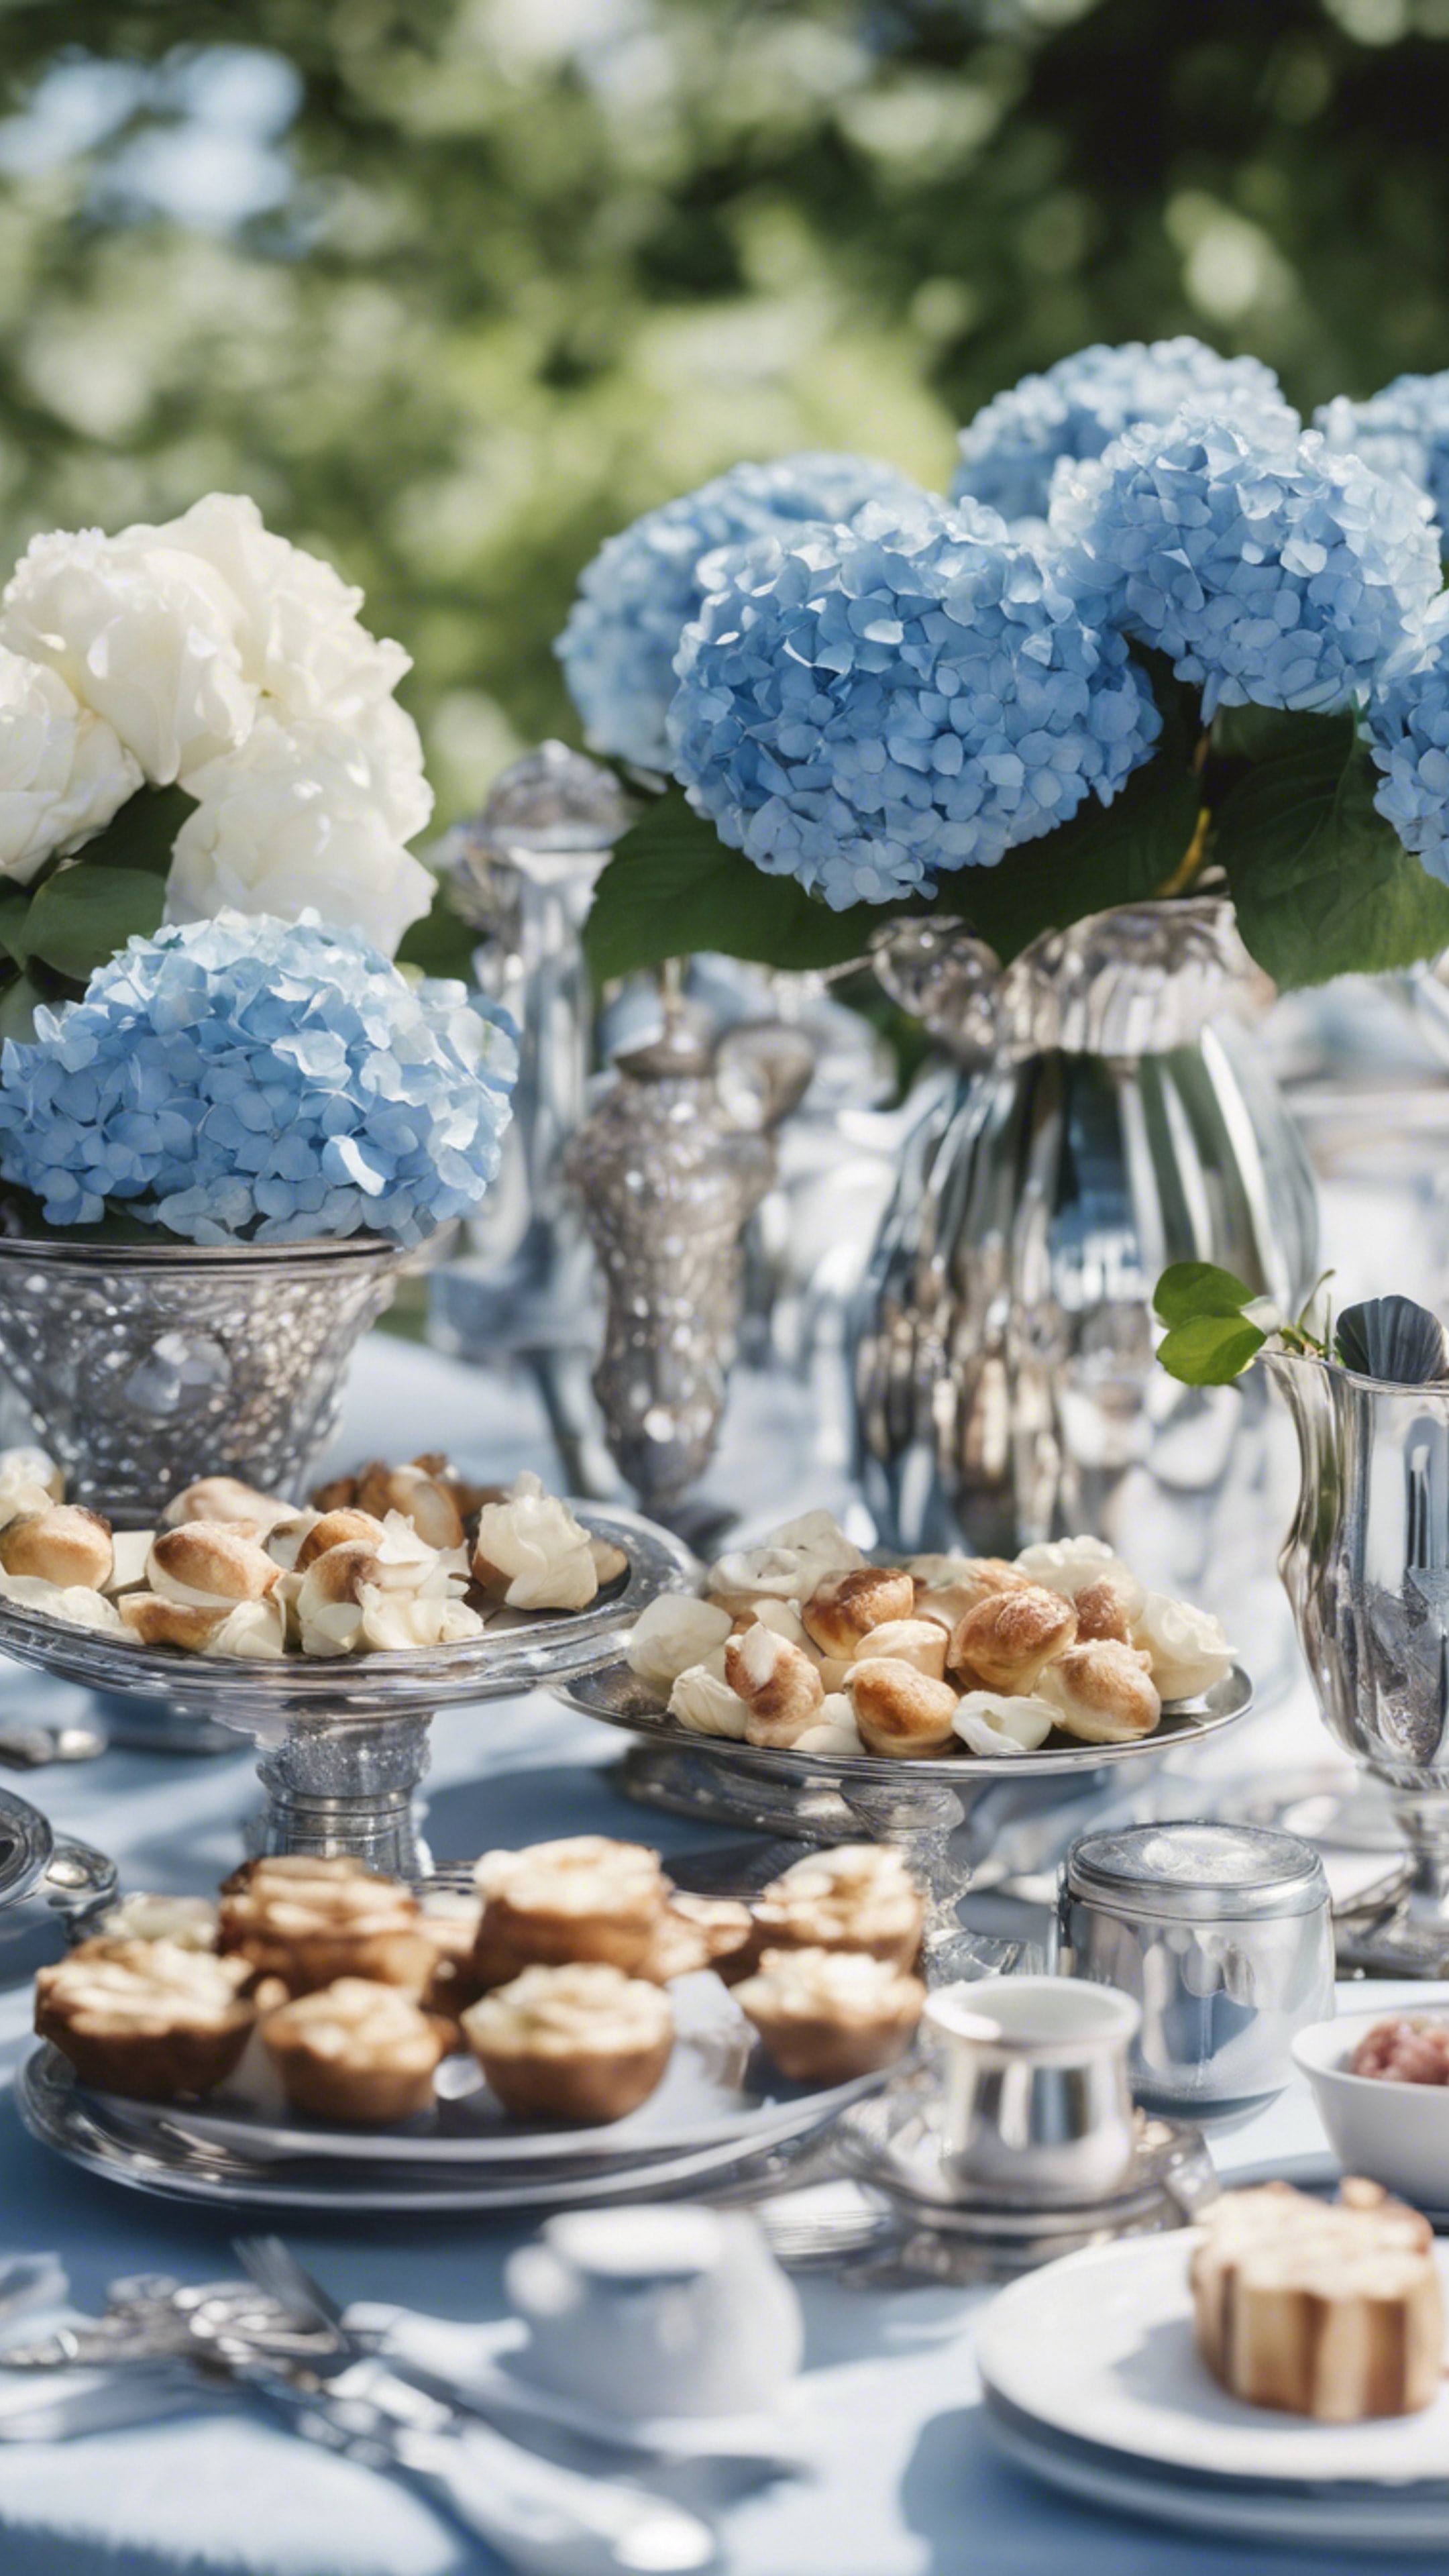 A sumptuous summer brunch spread on a preppy styled table, with clusters of blue hydrangeas and white roses in silver vases. Wallpaper[2ead7f7635ed44588249]